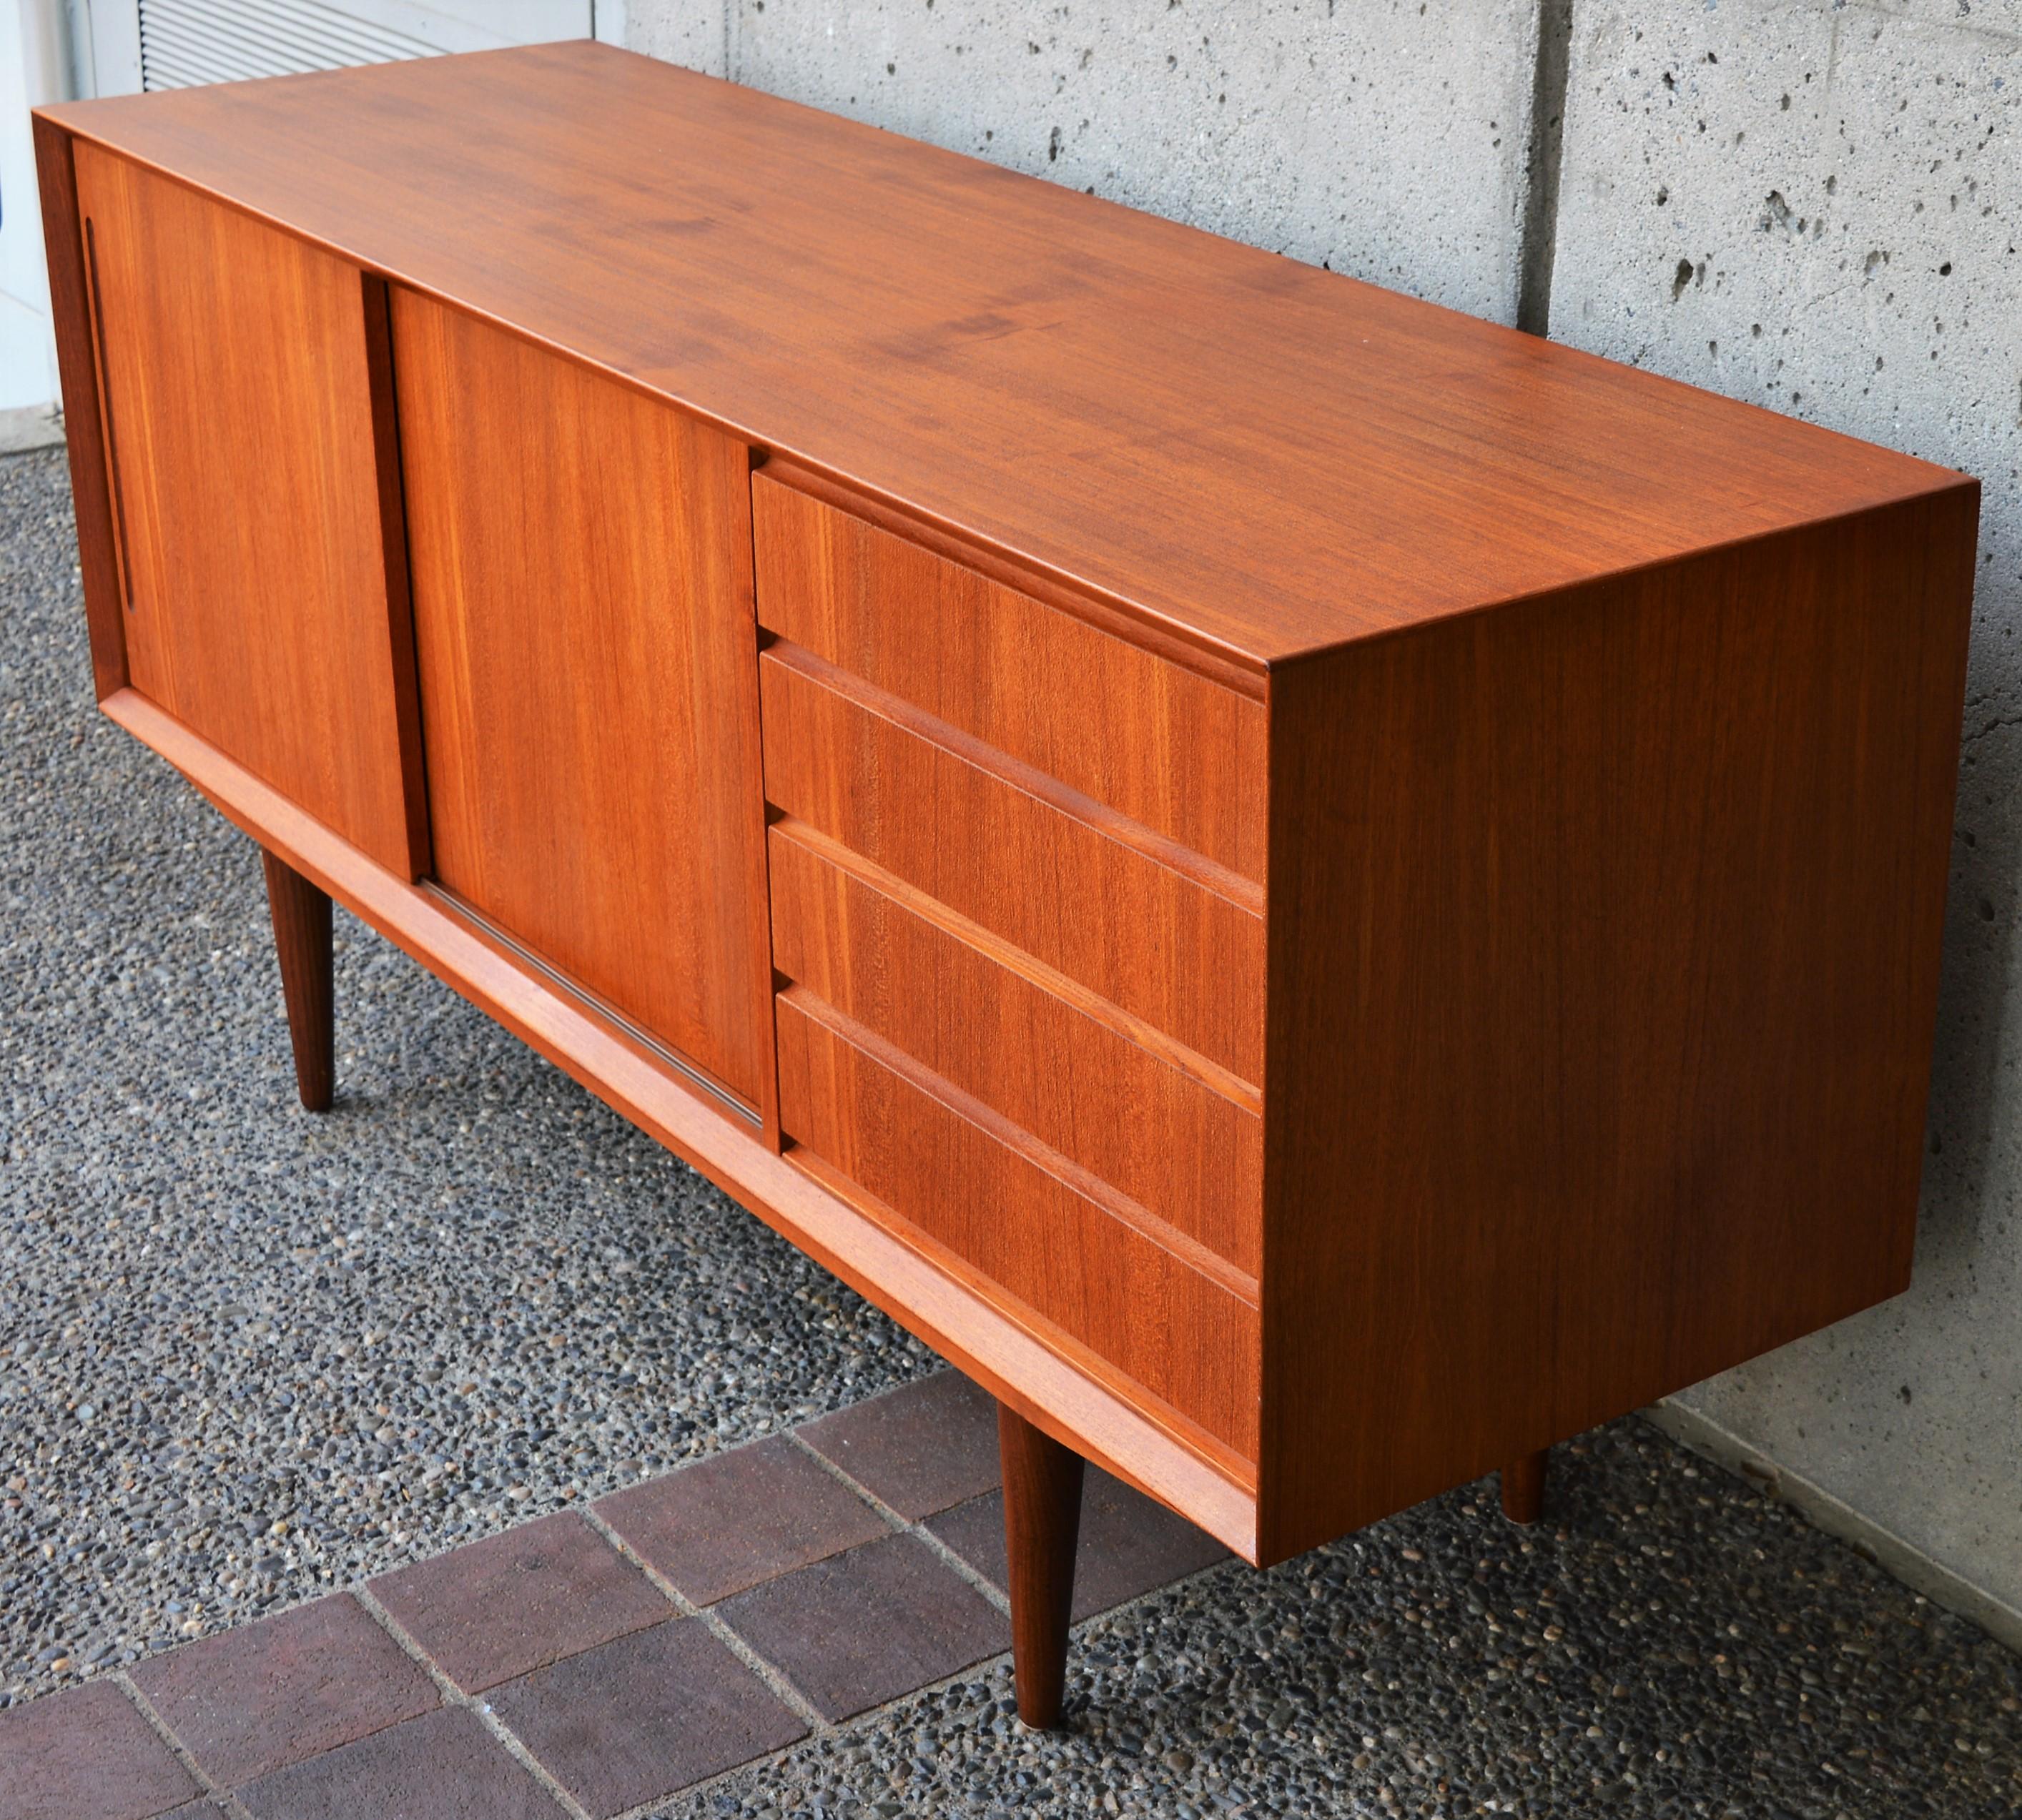 Danish Teak Compact Credenza with Left Bank of Drawers & Two Sliders, Alderslyst In Excellent Condition In New Westminster, British Columbia